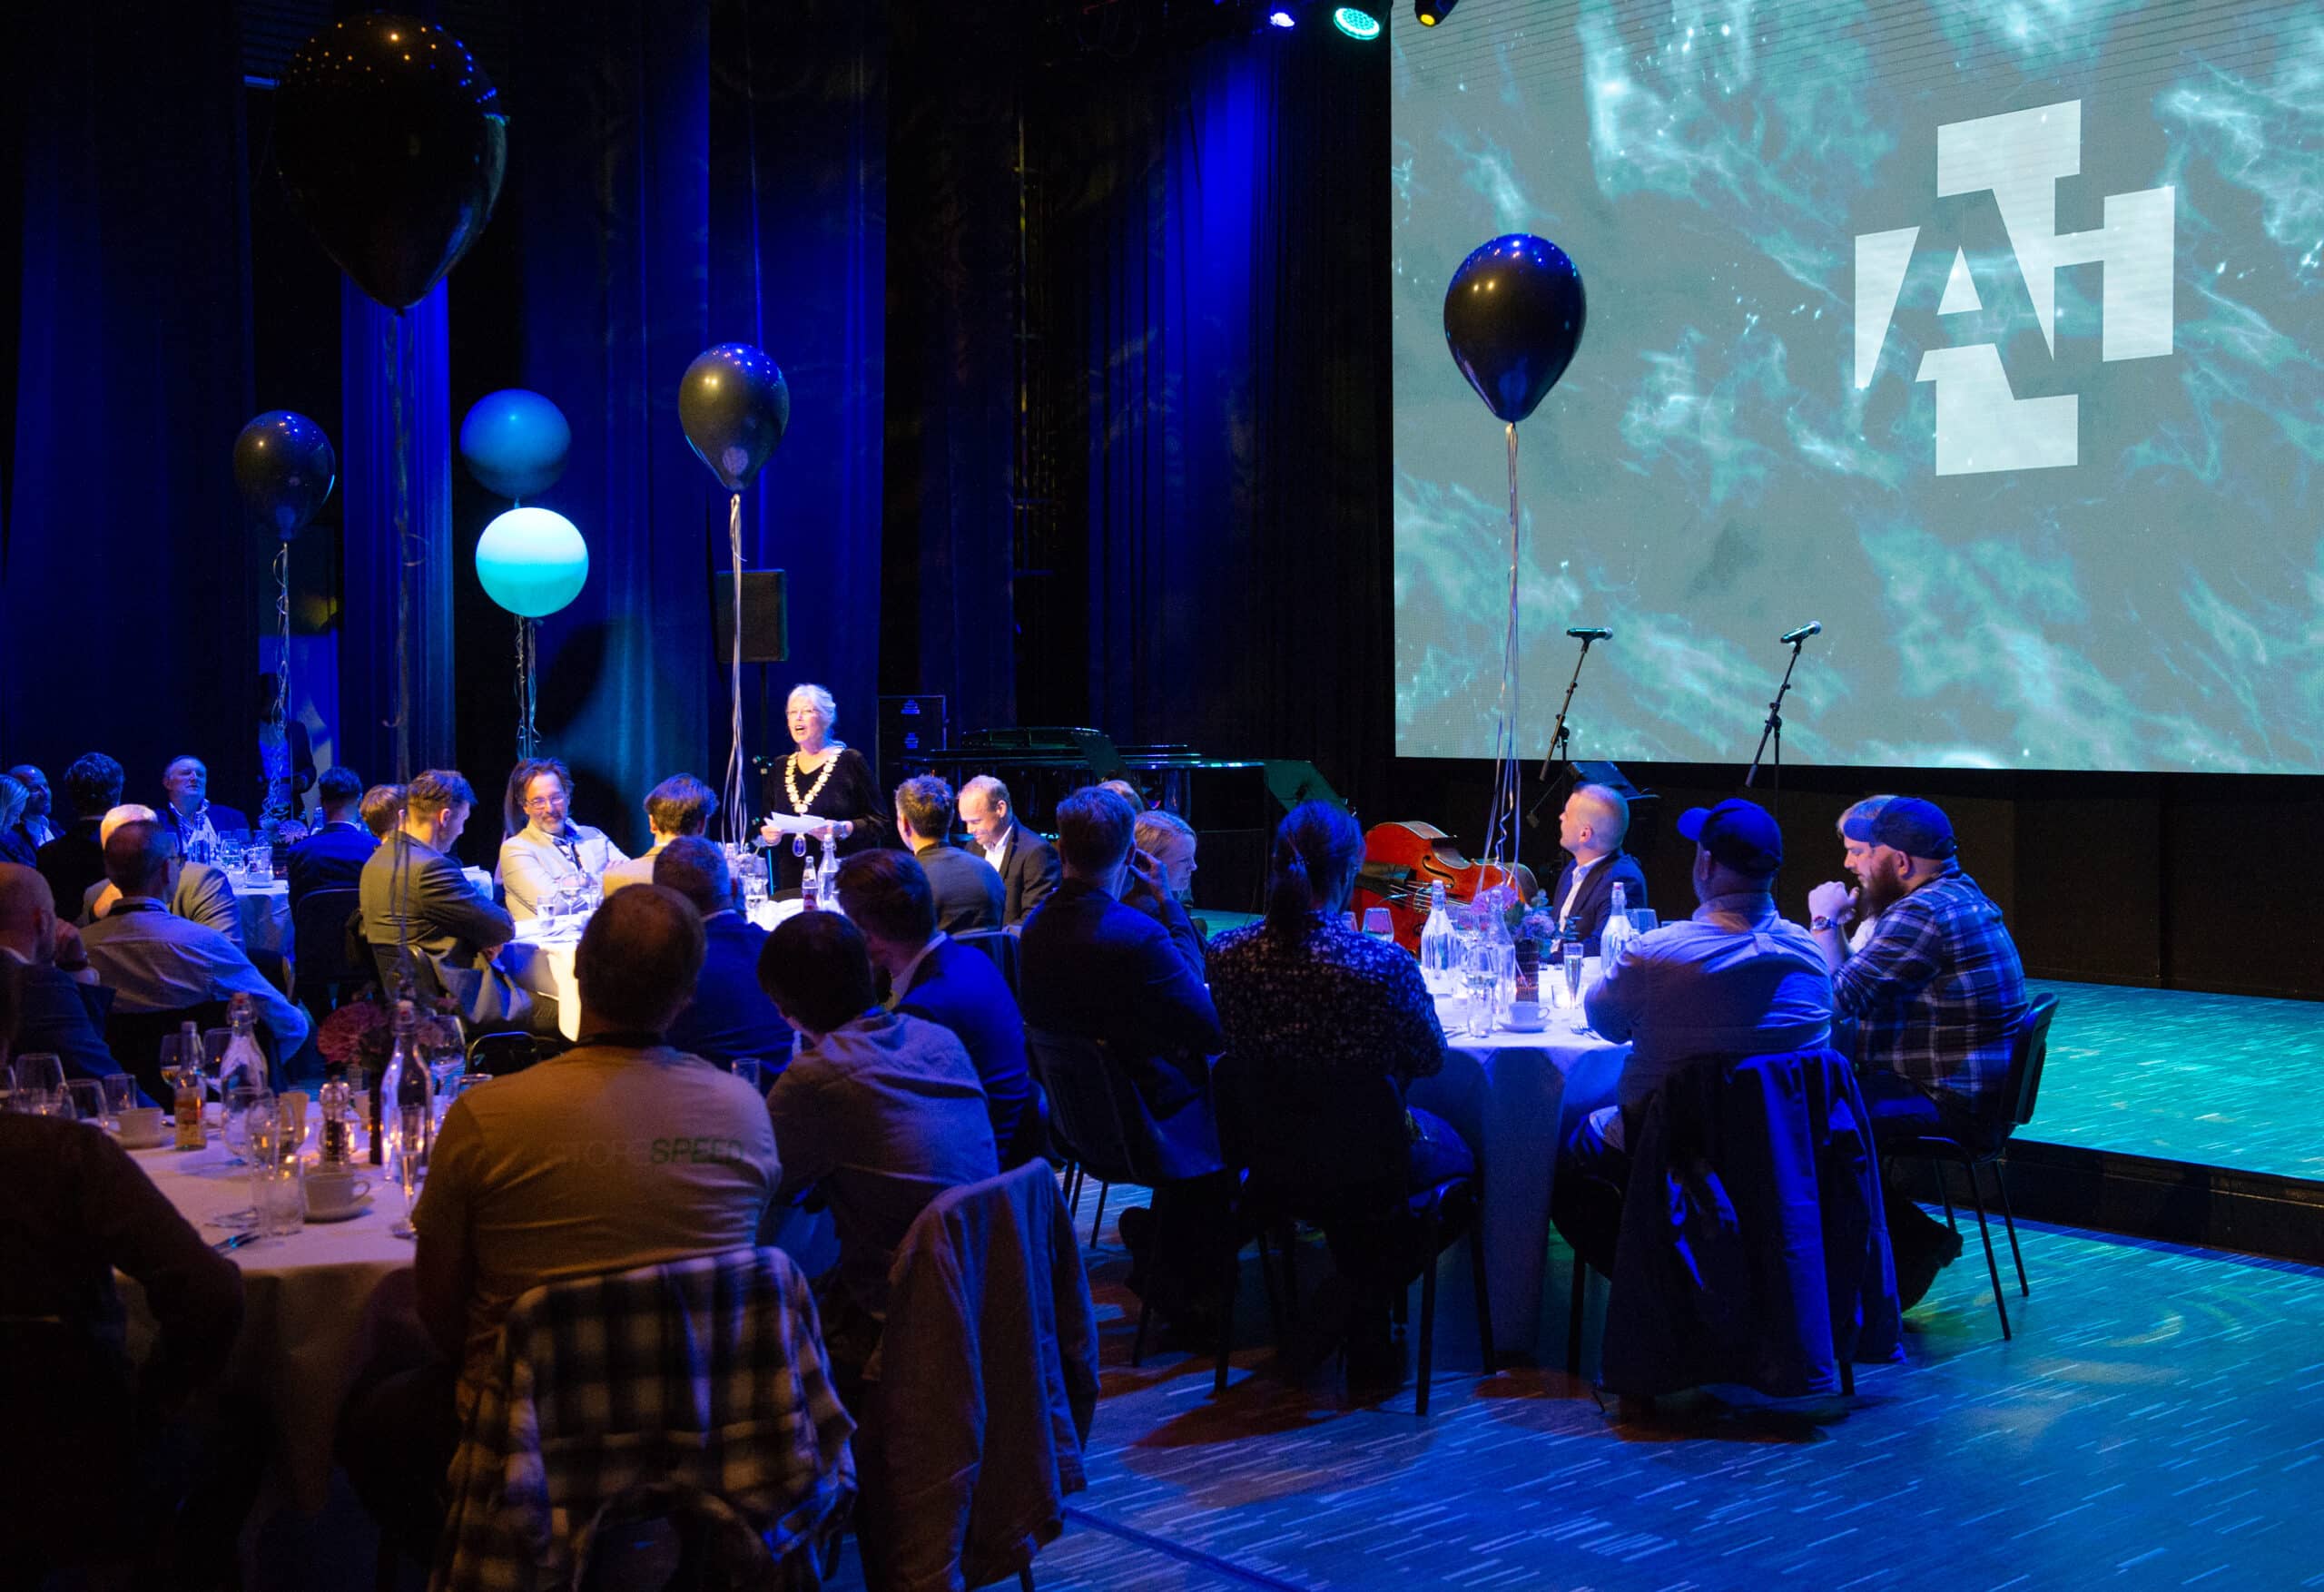 The Halden mayor Anne-Kari Holm (Sp) gave e a warm welcome in the conference dinner opening speech. PHOTO: Stein Johnsen, Contentvideo.no